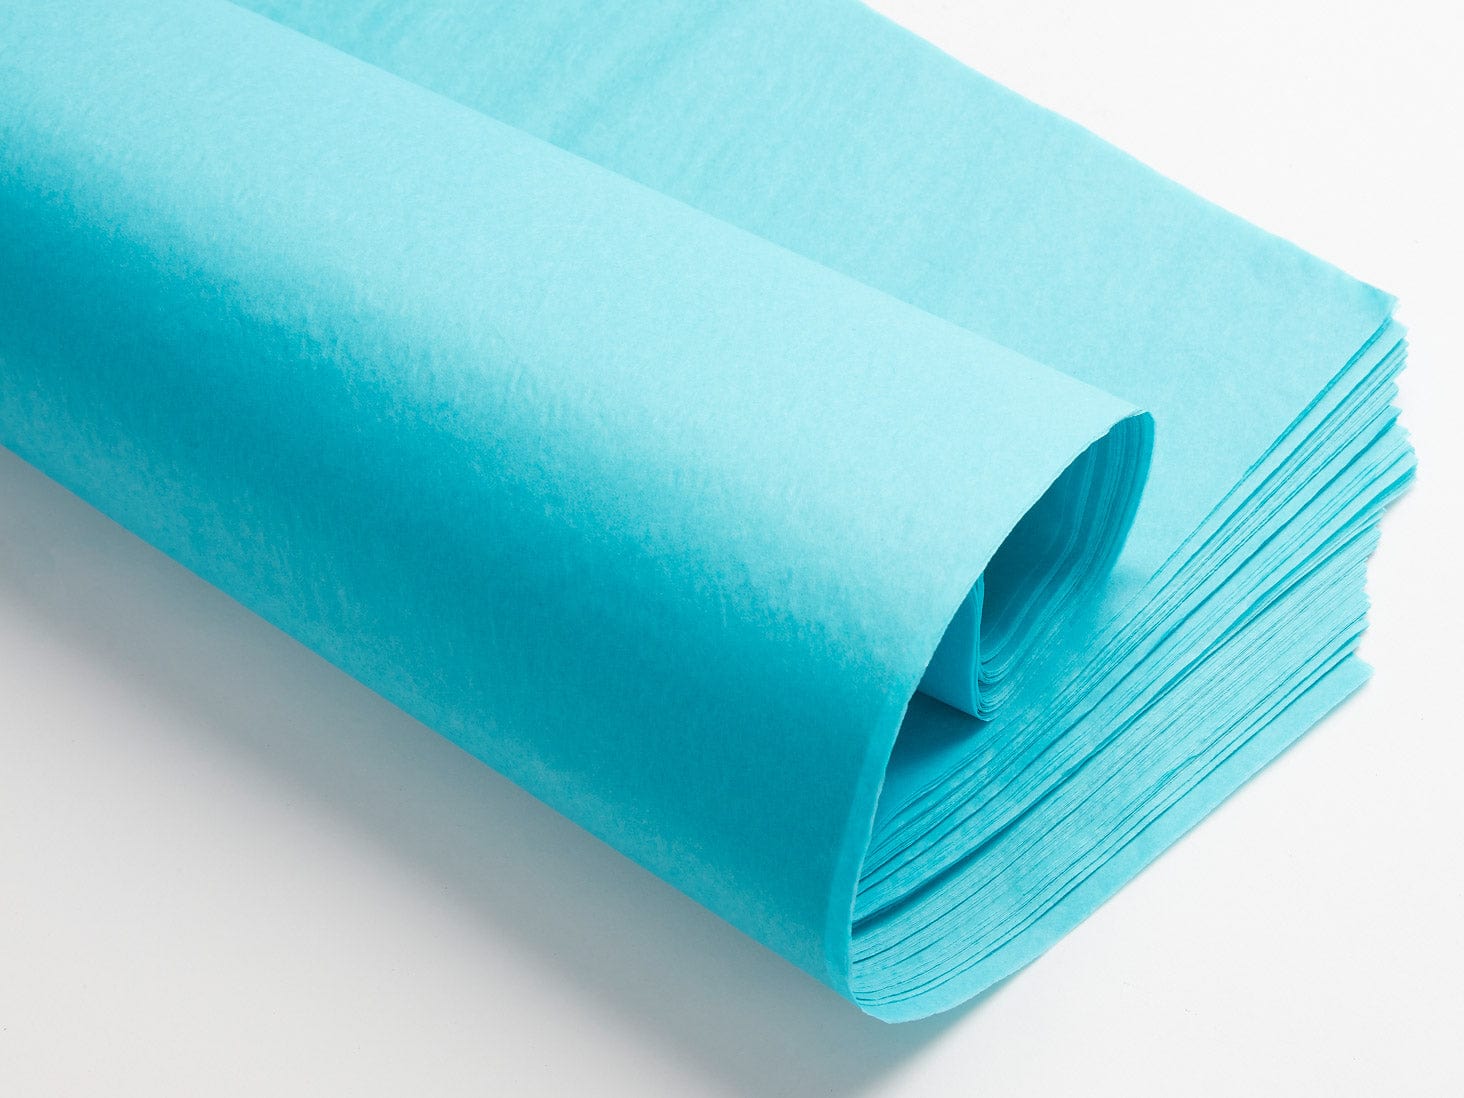 Misty Turquoise Luxury Tissue Paper 96 Sheets